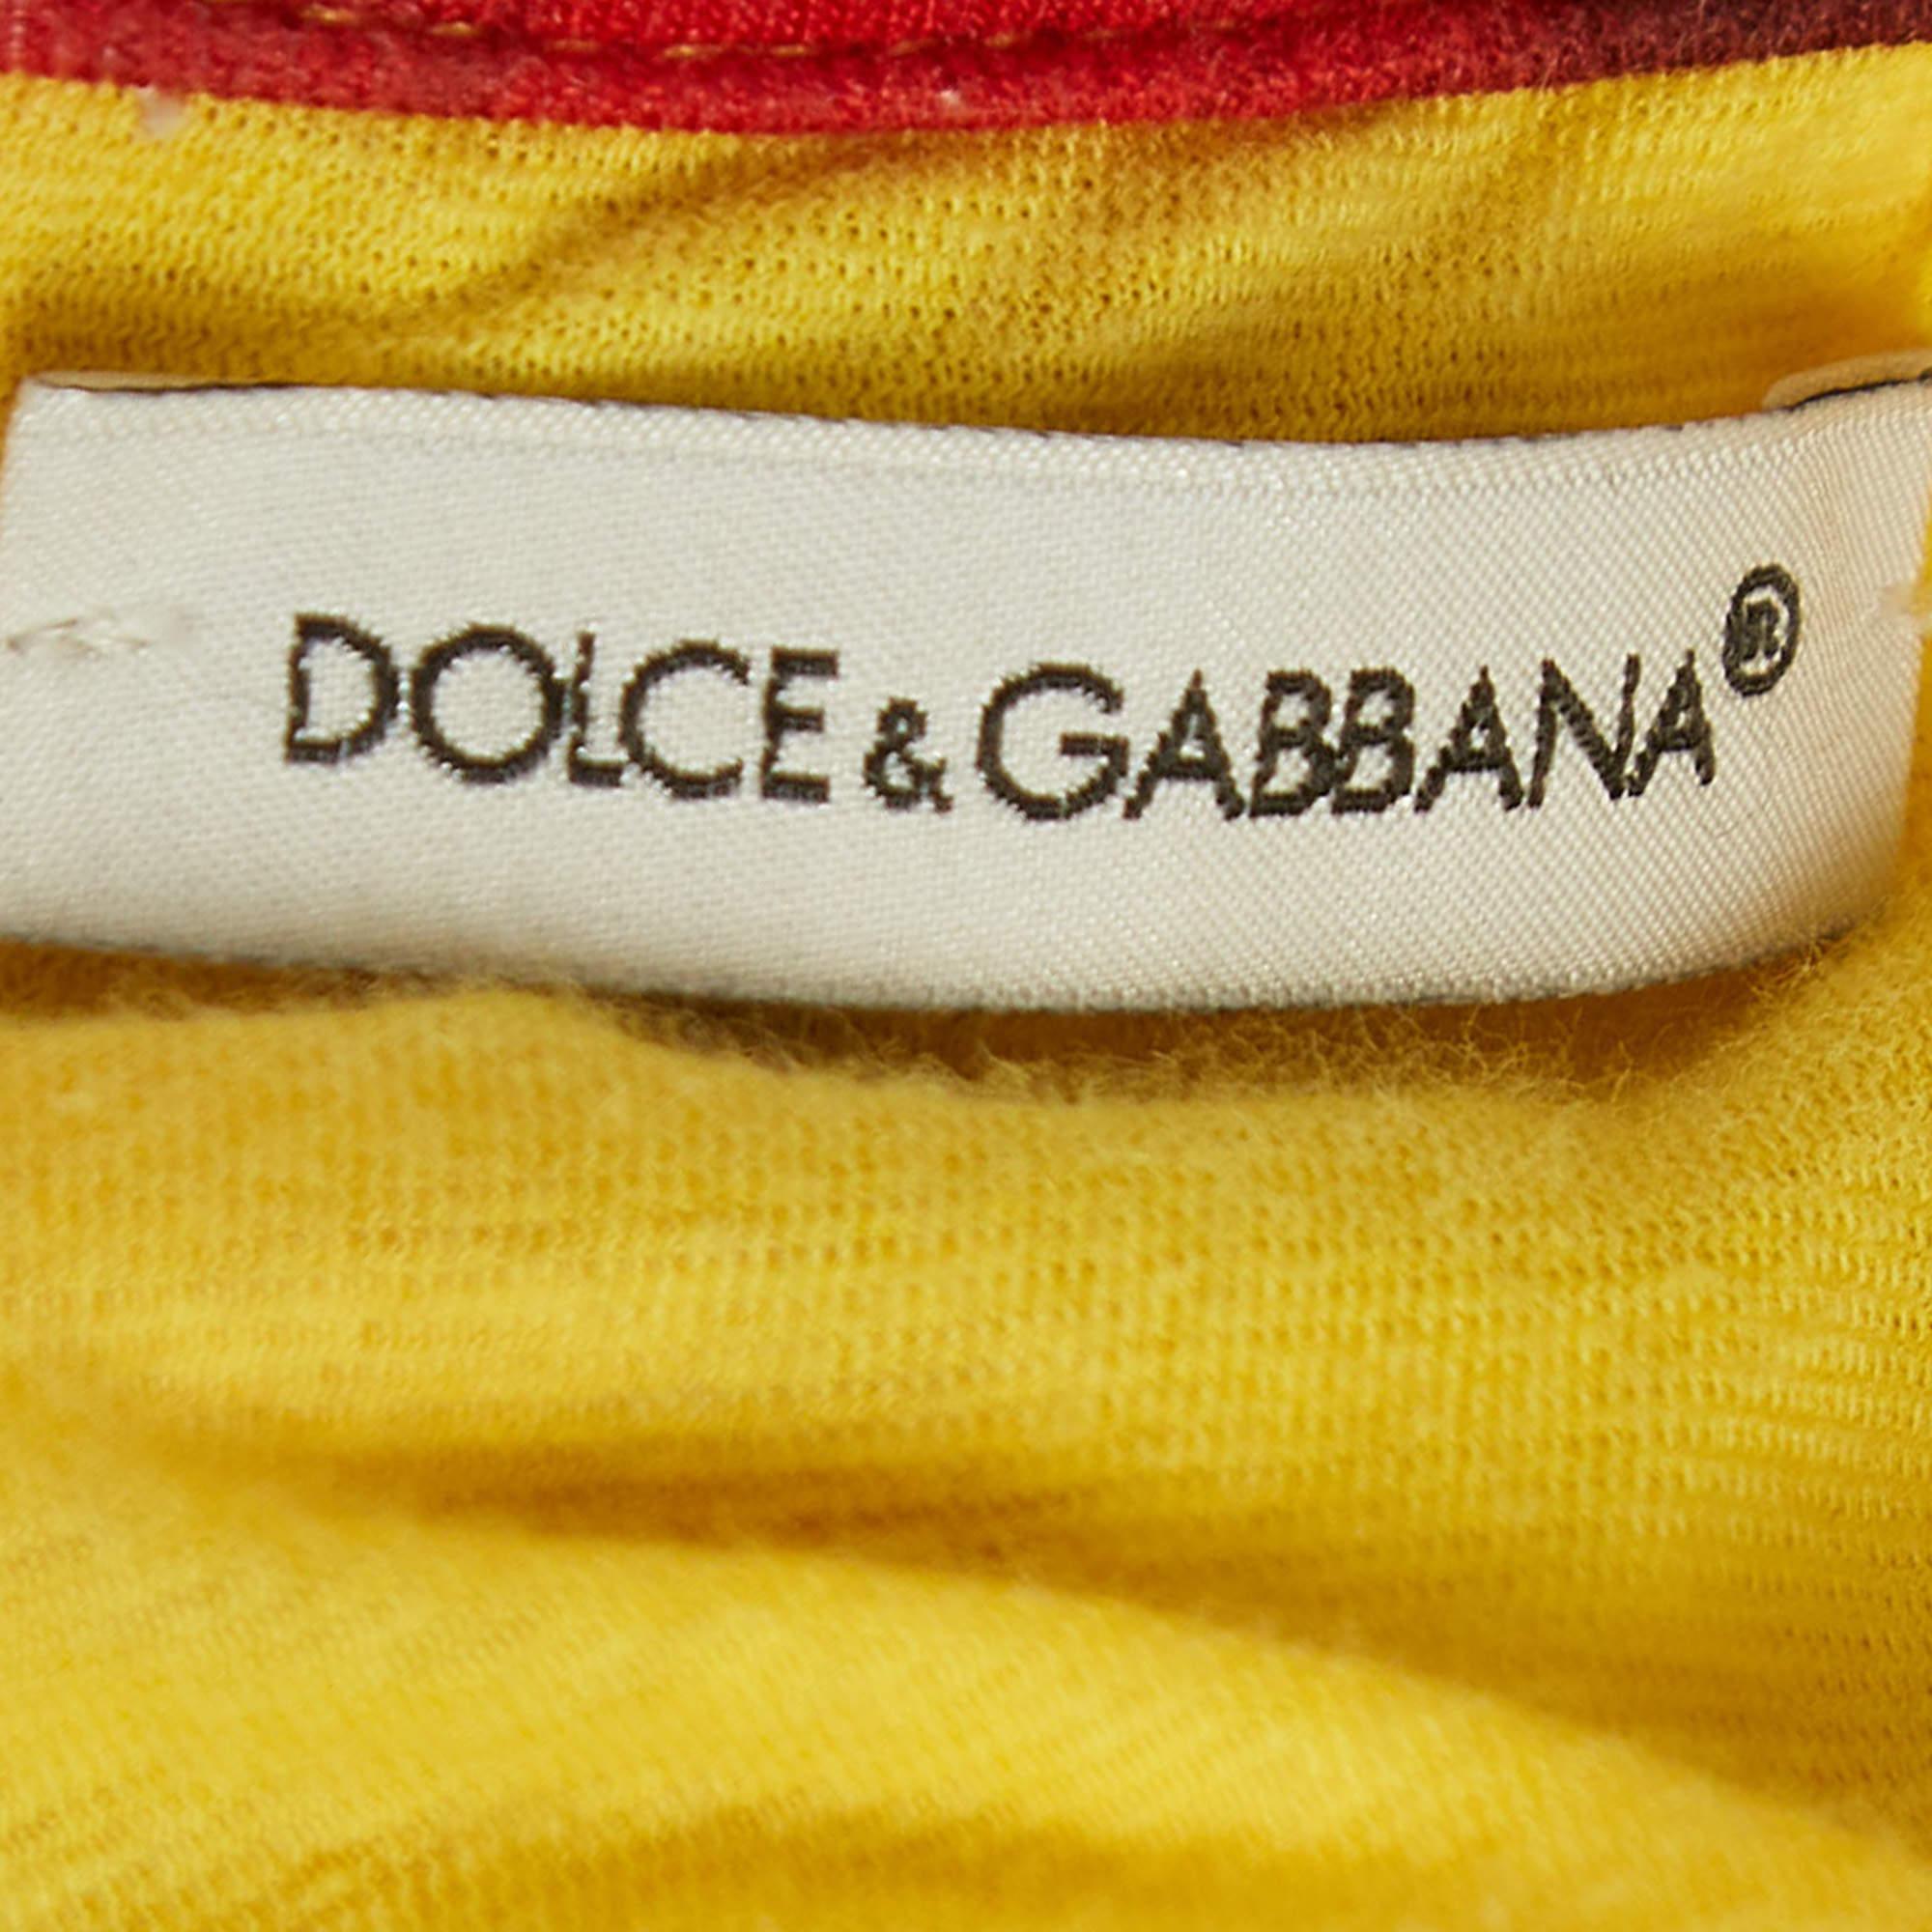 Dolce & Gabbana Yellow Floral Printed Jersey Dress (11-12 Yrs) In Good Condition For Sale In Dubai, Al Qouz 2